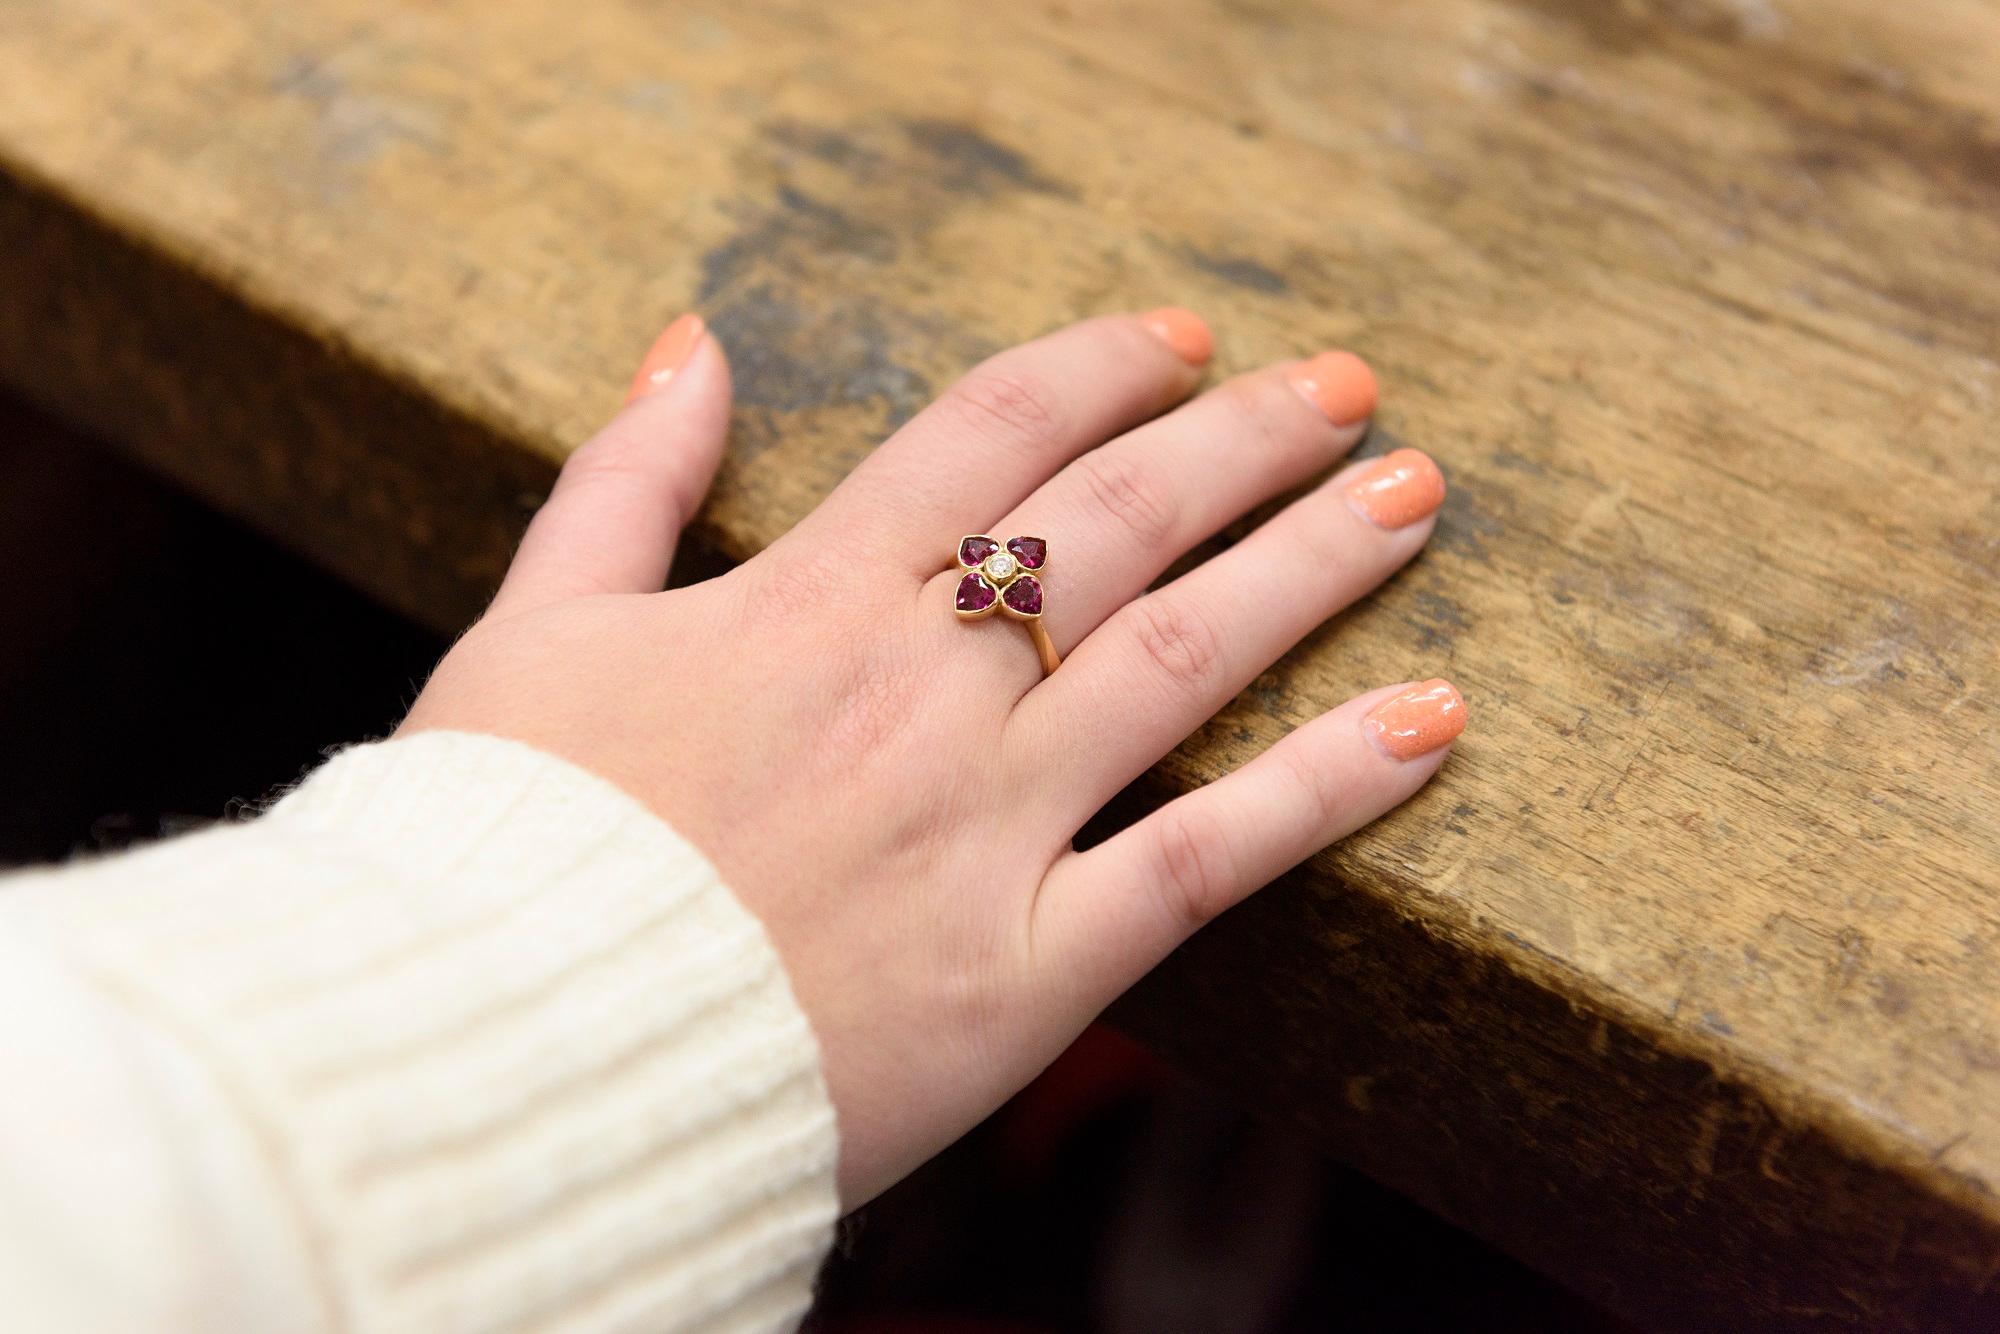 DEAKIN & FRANCIS, Piccadilly Arcade, London

This stunning 18kt gold diamond and rubelite cluster ring is the perfect gift for the lovely lady in your life! Made from the finest quality gemstones and the only one that was made it really is an item